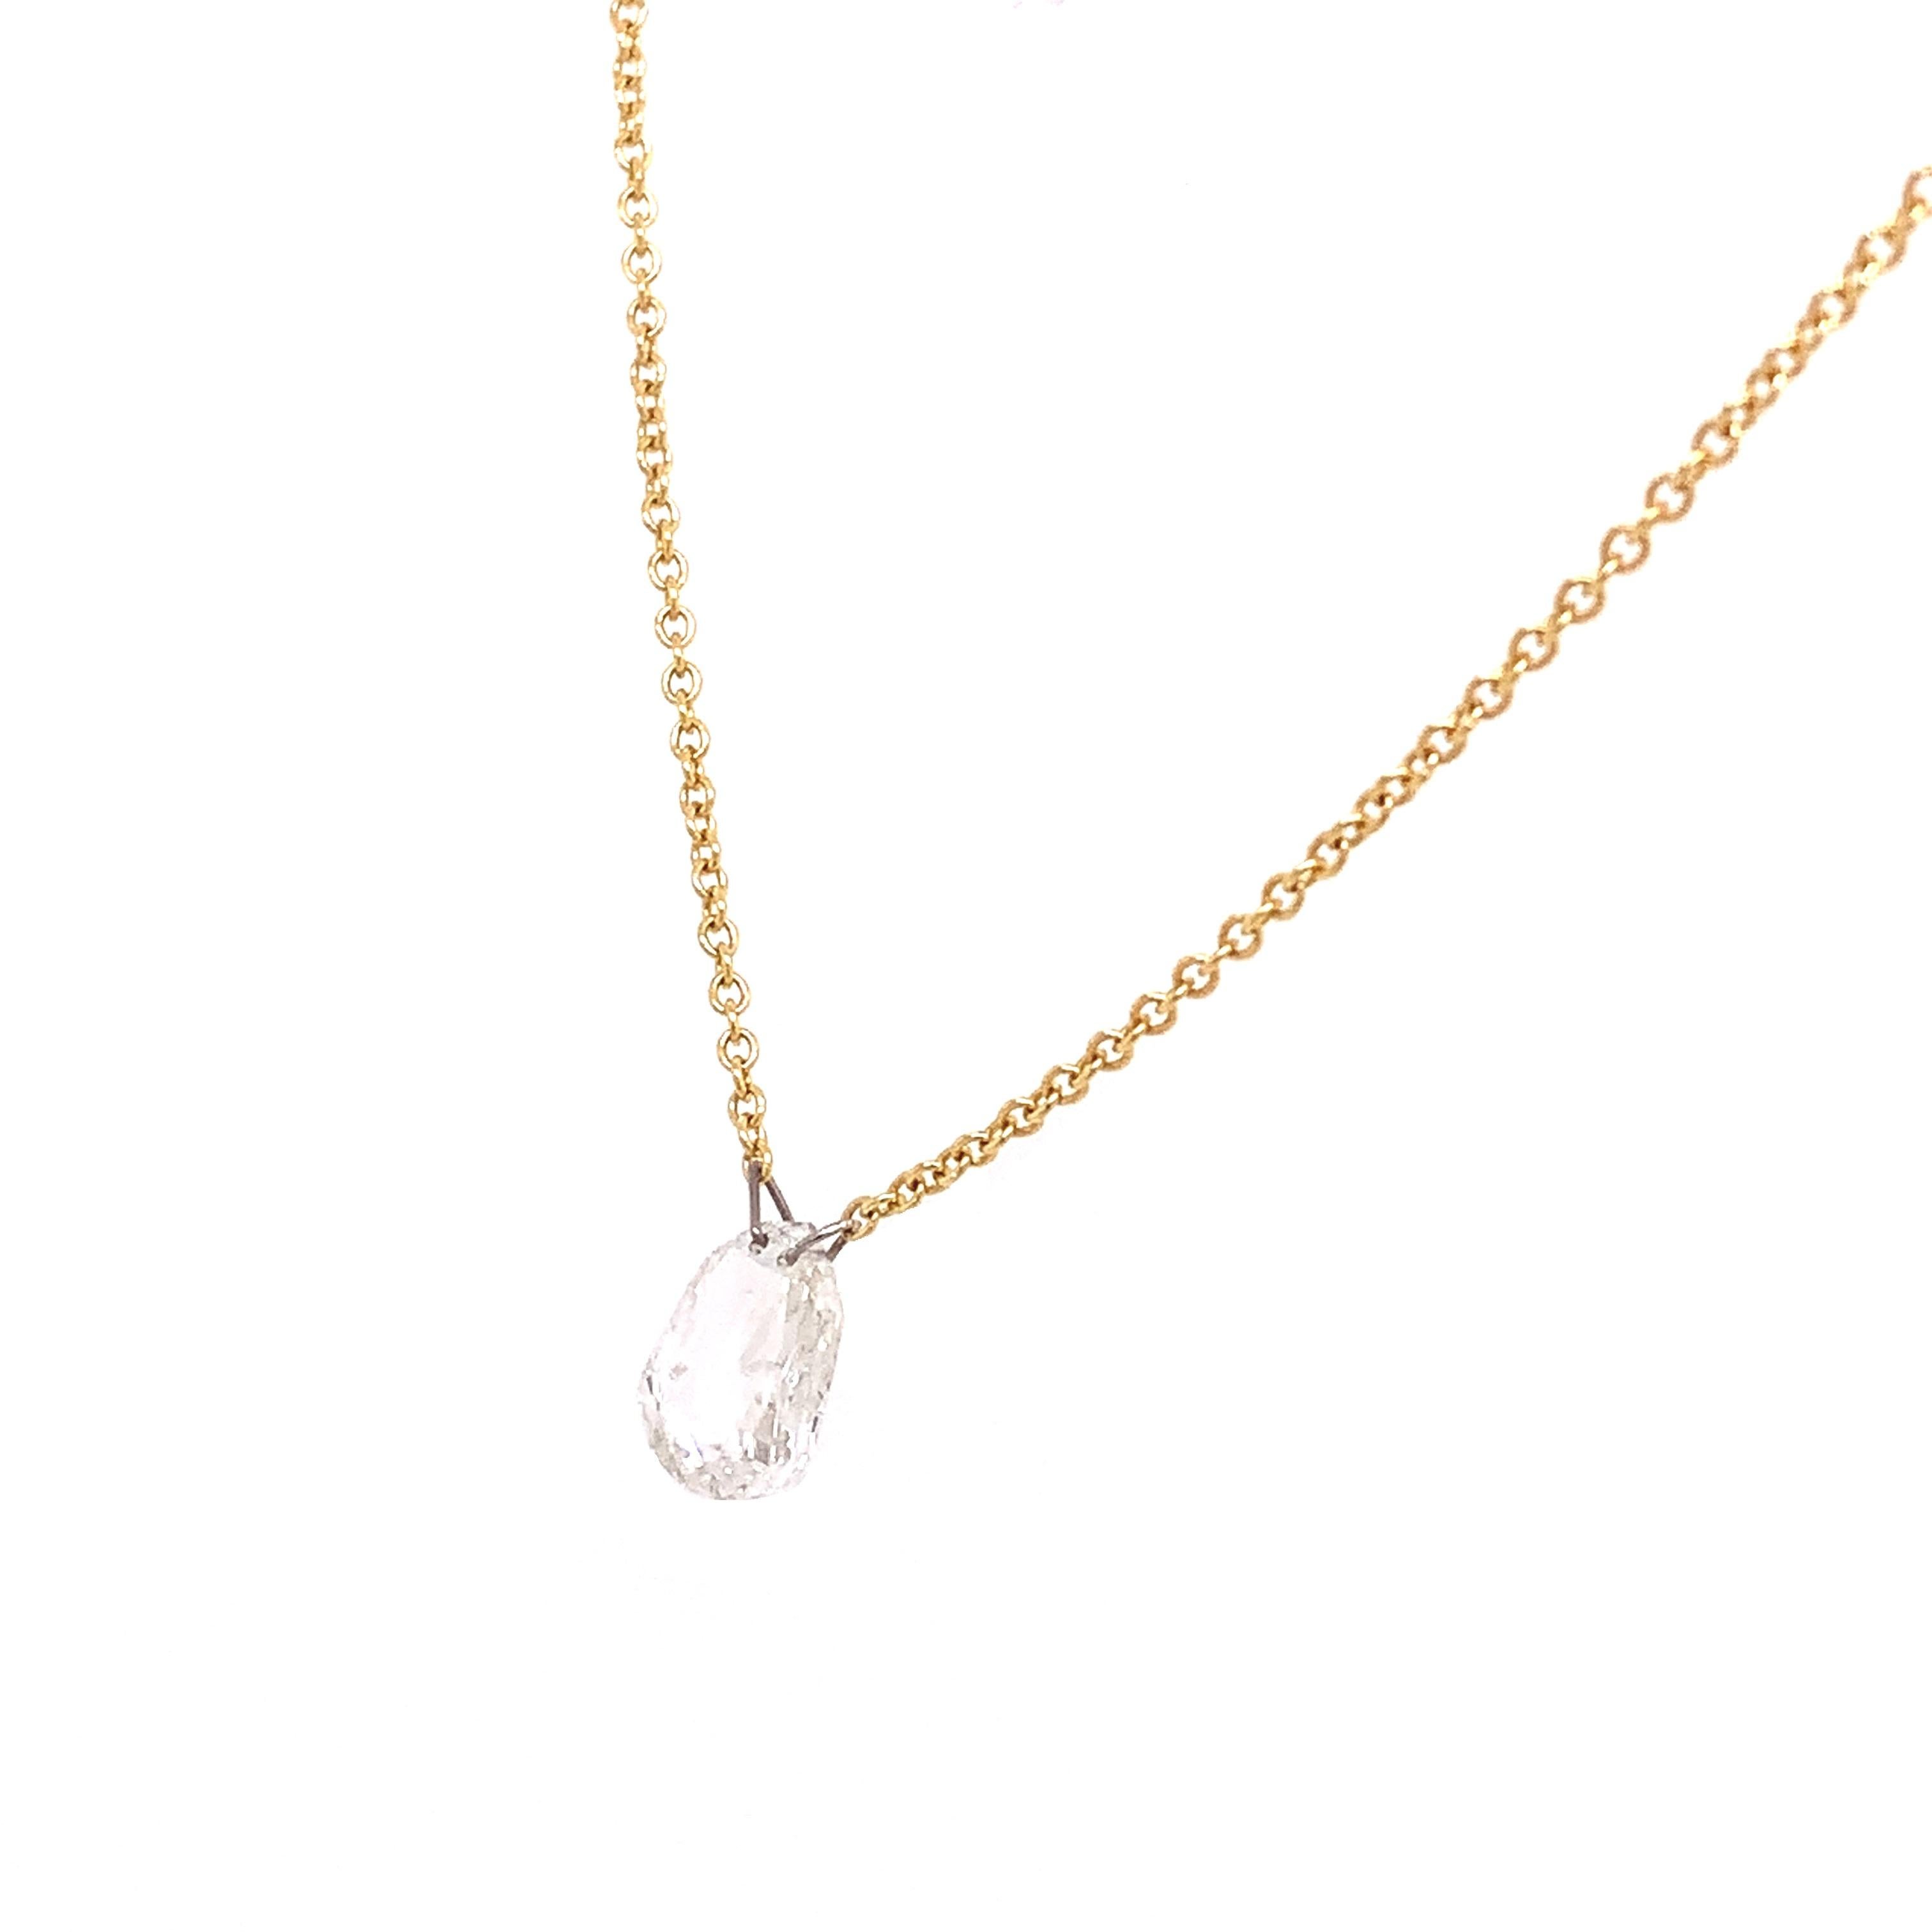 Dangling Diamond Collection,

A bold 18K Yellow Gold adjustable chain unleashes the inimitable beauty of the 0.76 carat Diamond dangling with a pierced Platinum ring.


